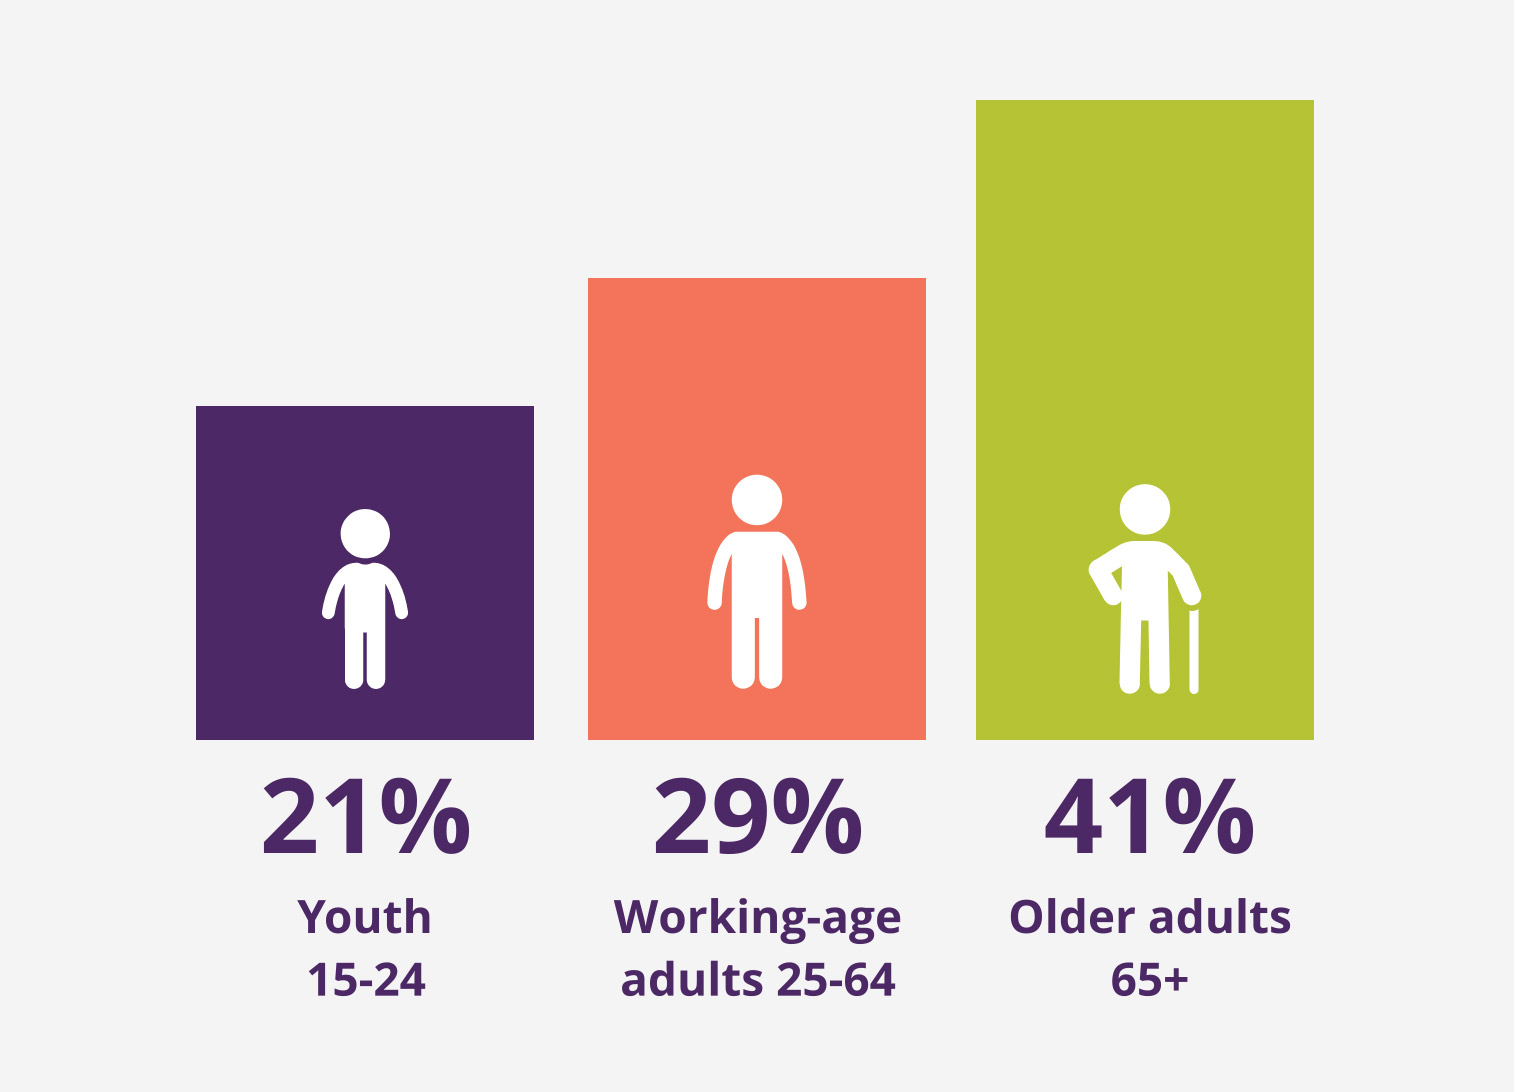 Bar graph depicting percentage of Nova Scotians who report experiencing disabilities by age groups.